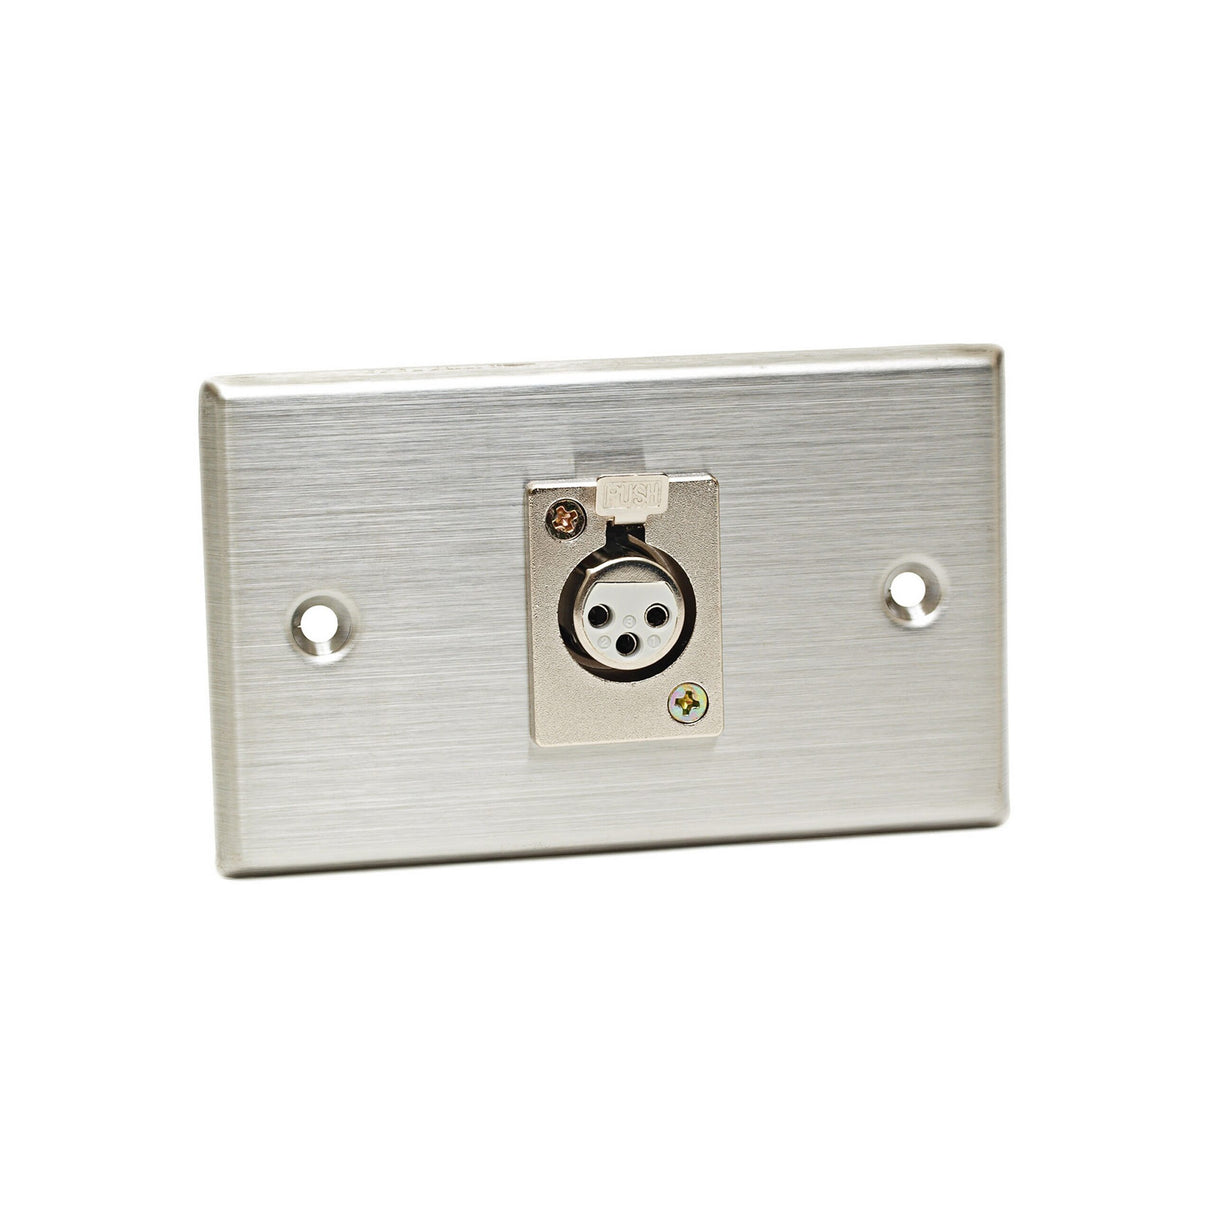 CAD Audio 40-347 Stainless Steel Single 3-Pin XLR-F Connector Duplex Wall Plate